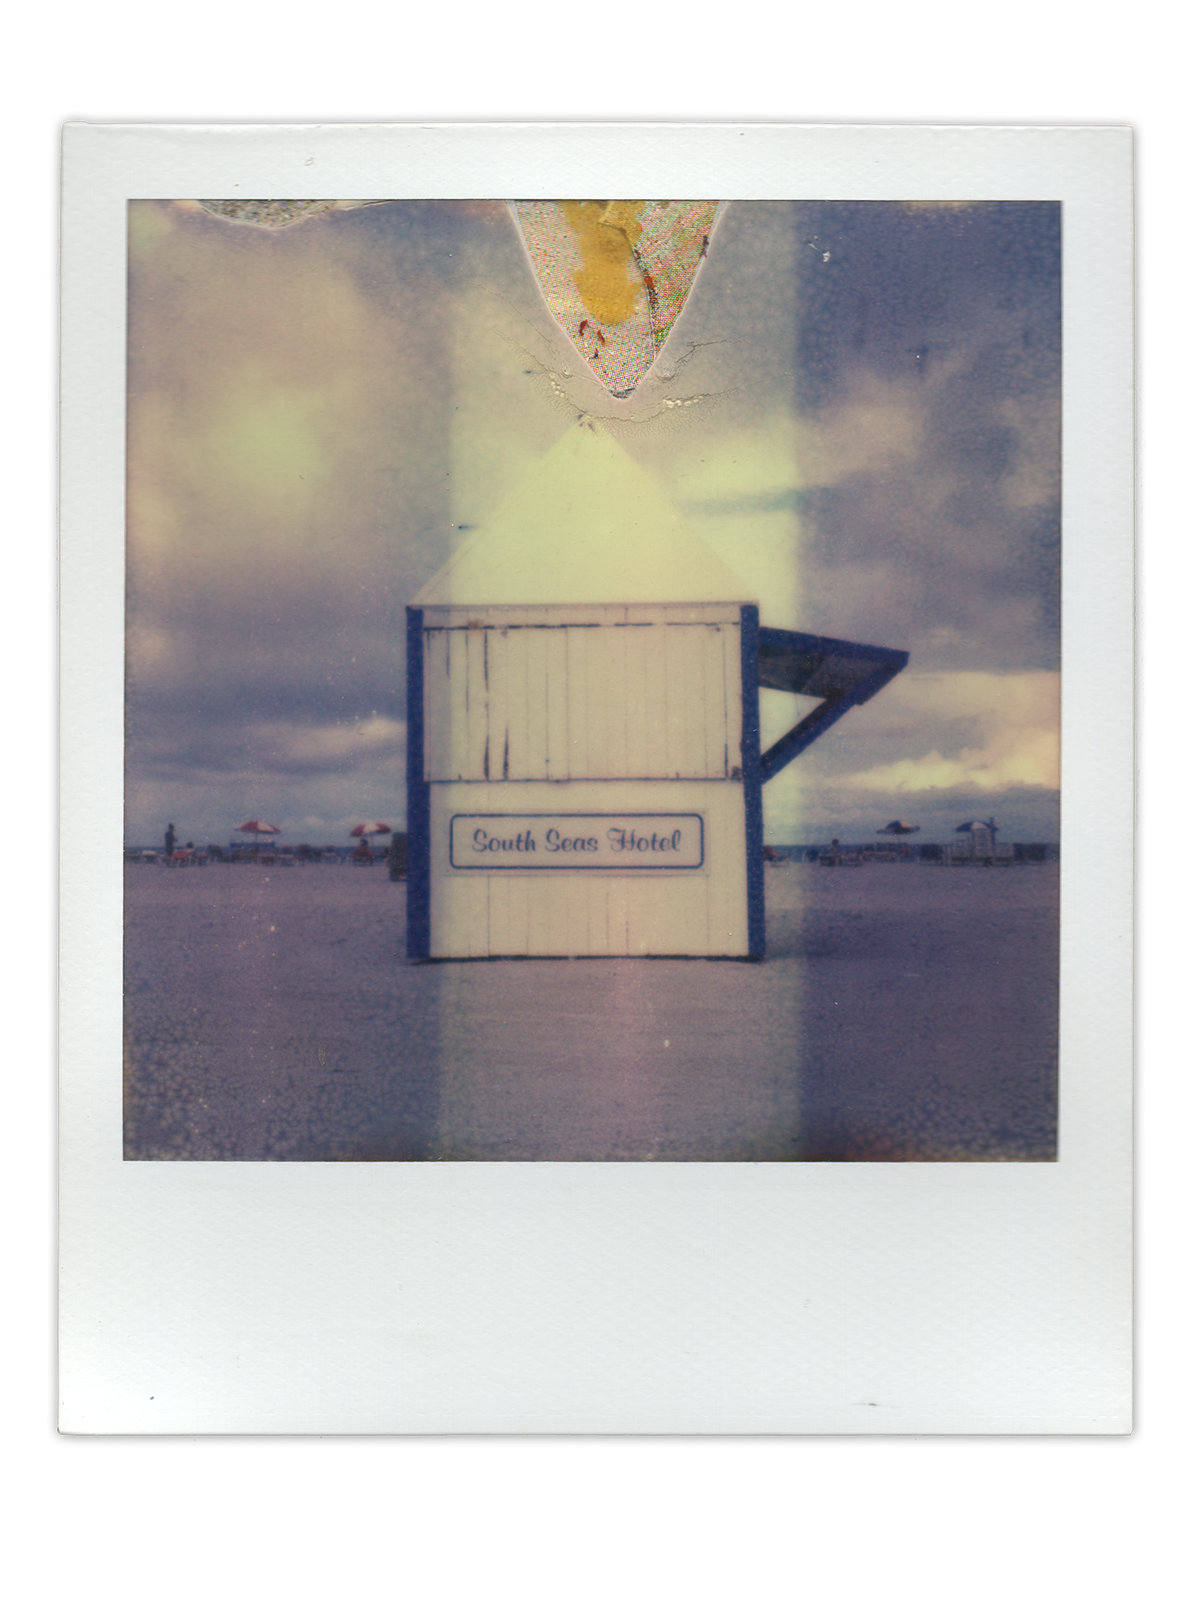 miami south beach POLAROID The Impossible Project PX-70 collage Cameron Wyckoff in.prnthtkls inprnthtkls in (prn.th tkl)S Jot&Dollop